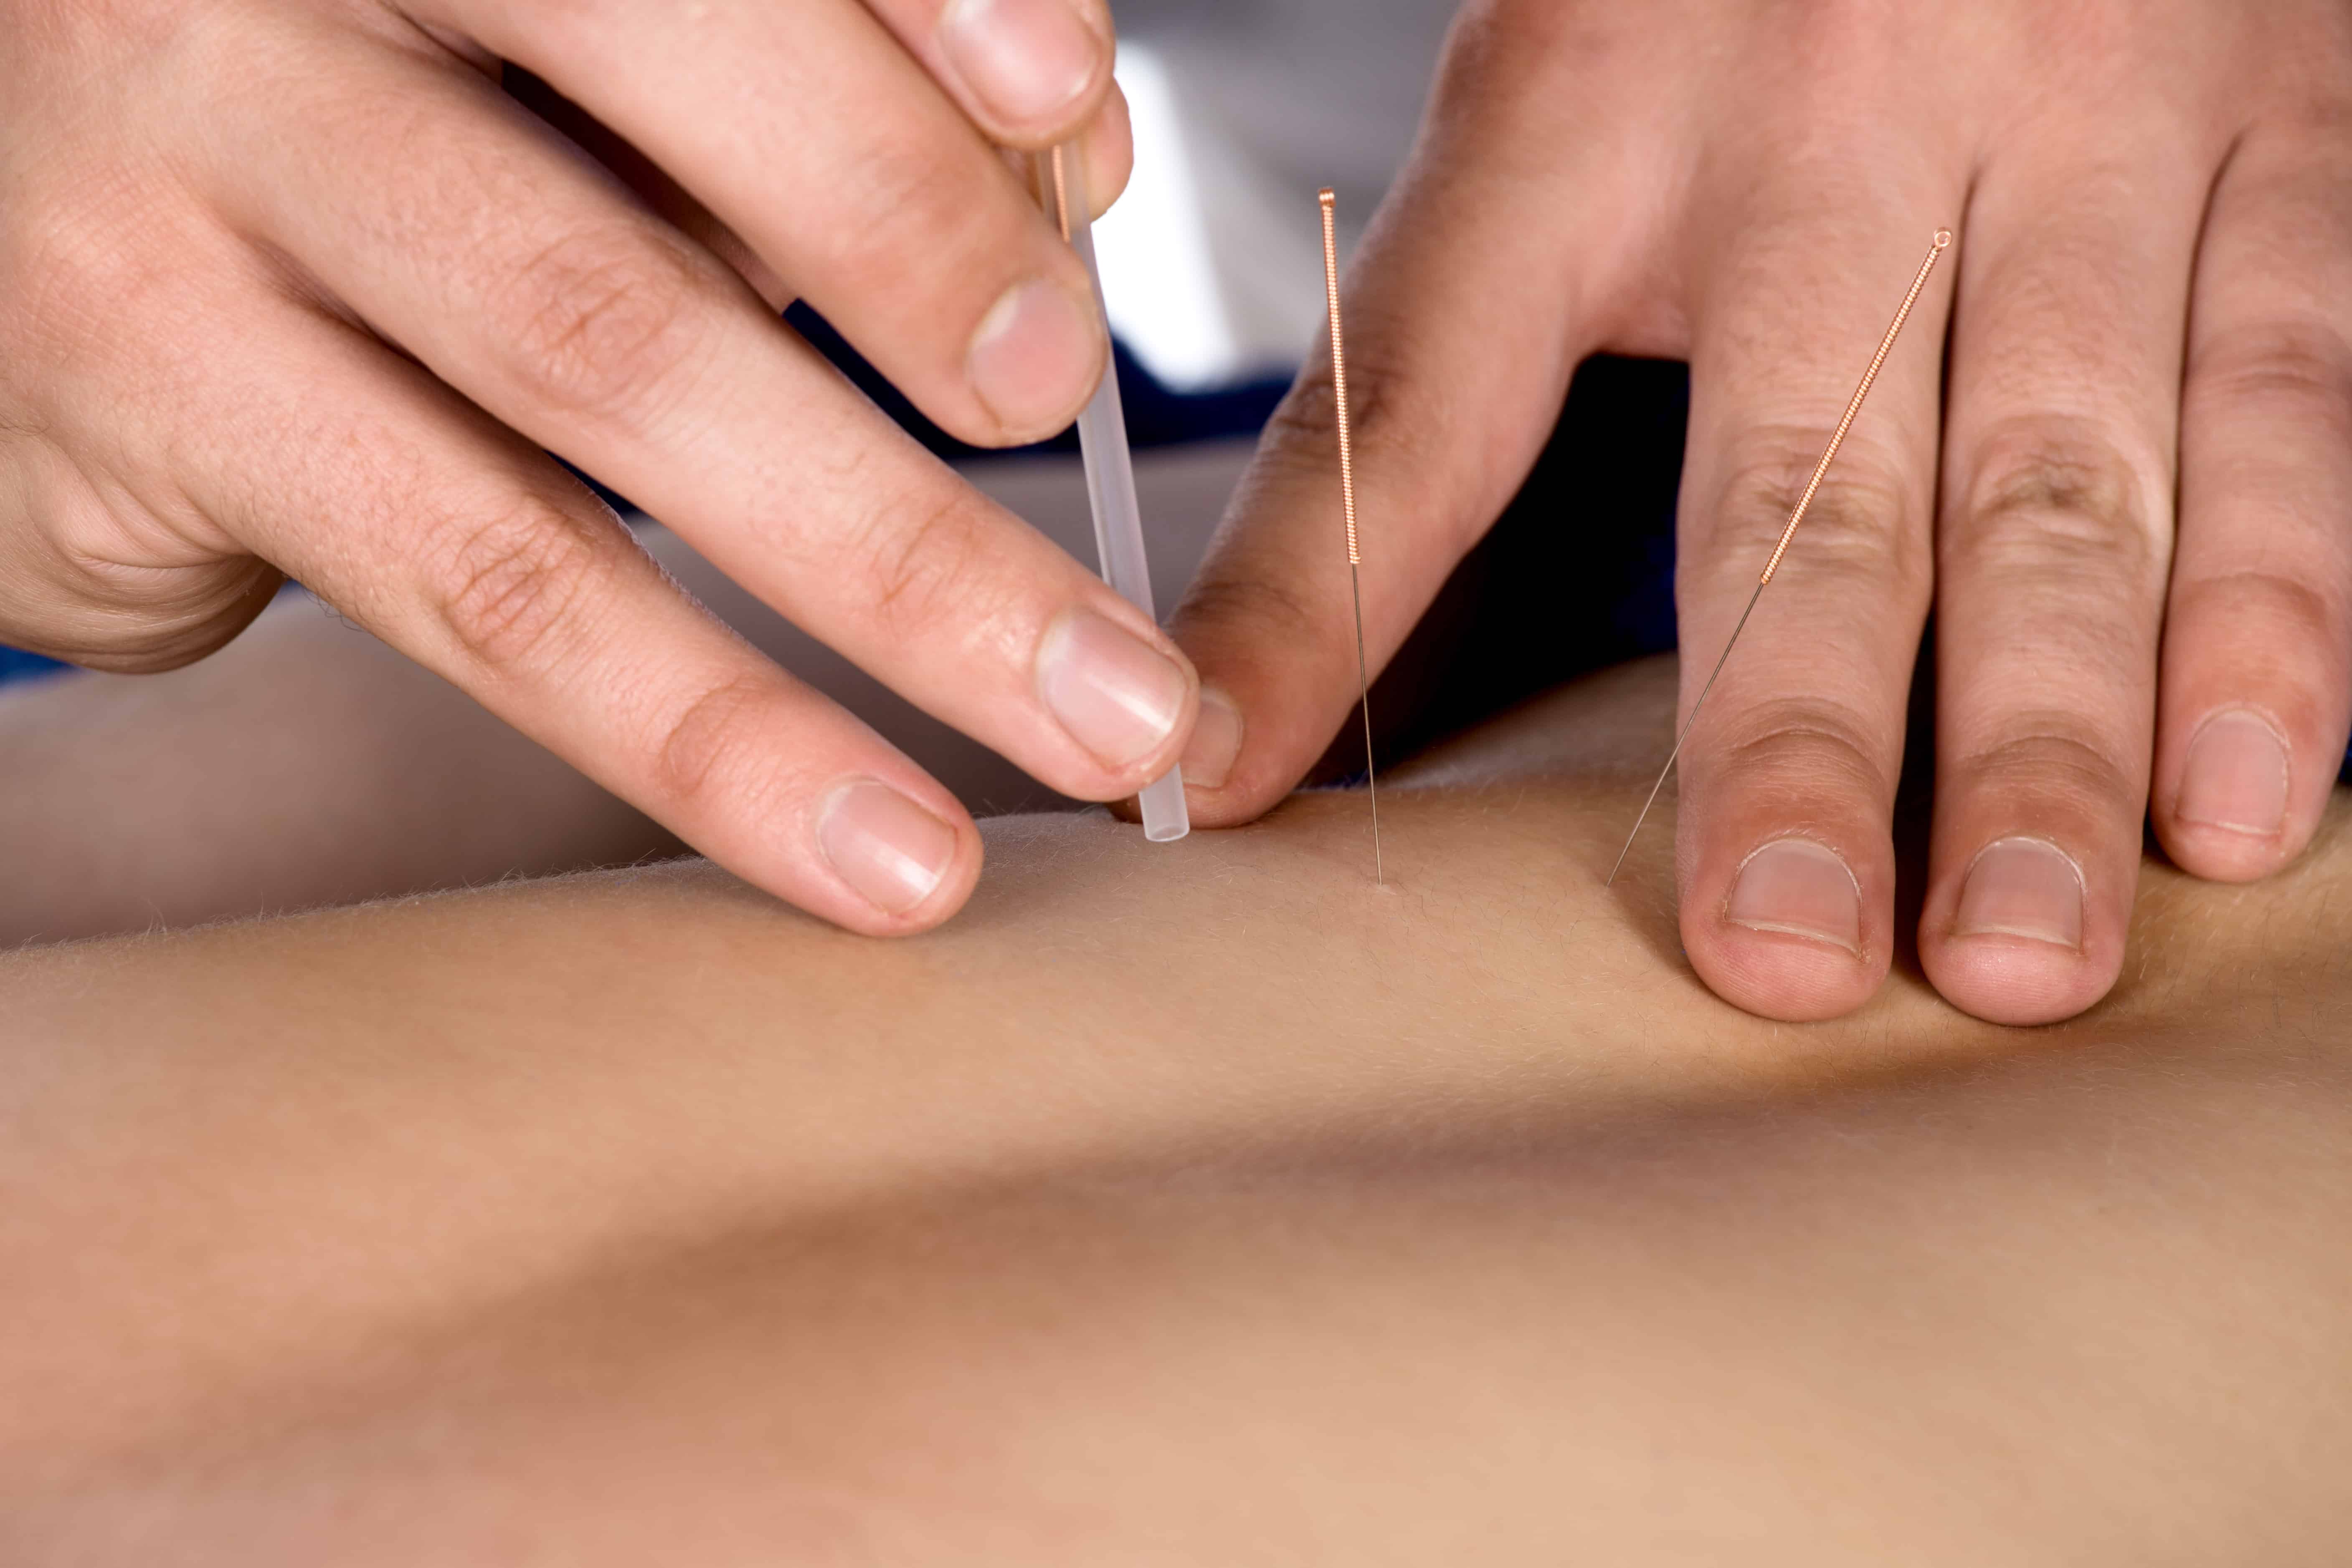 Dry needling is an effective treatment to reduce pain and muscle tightness